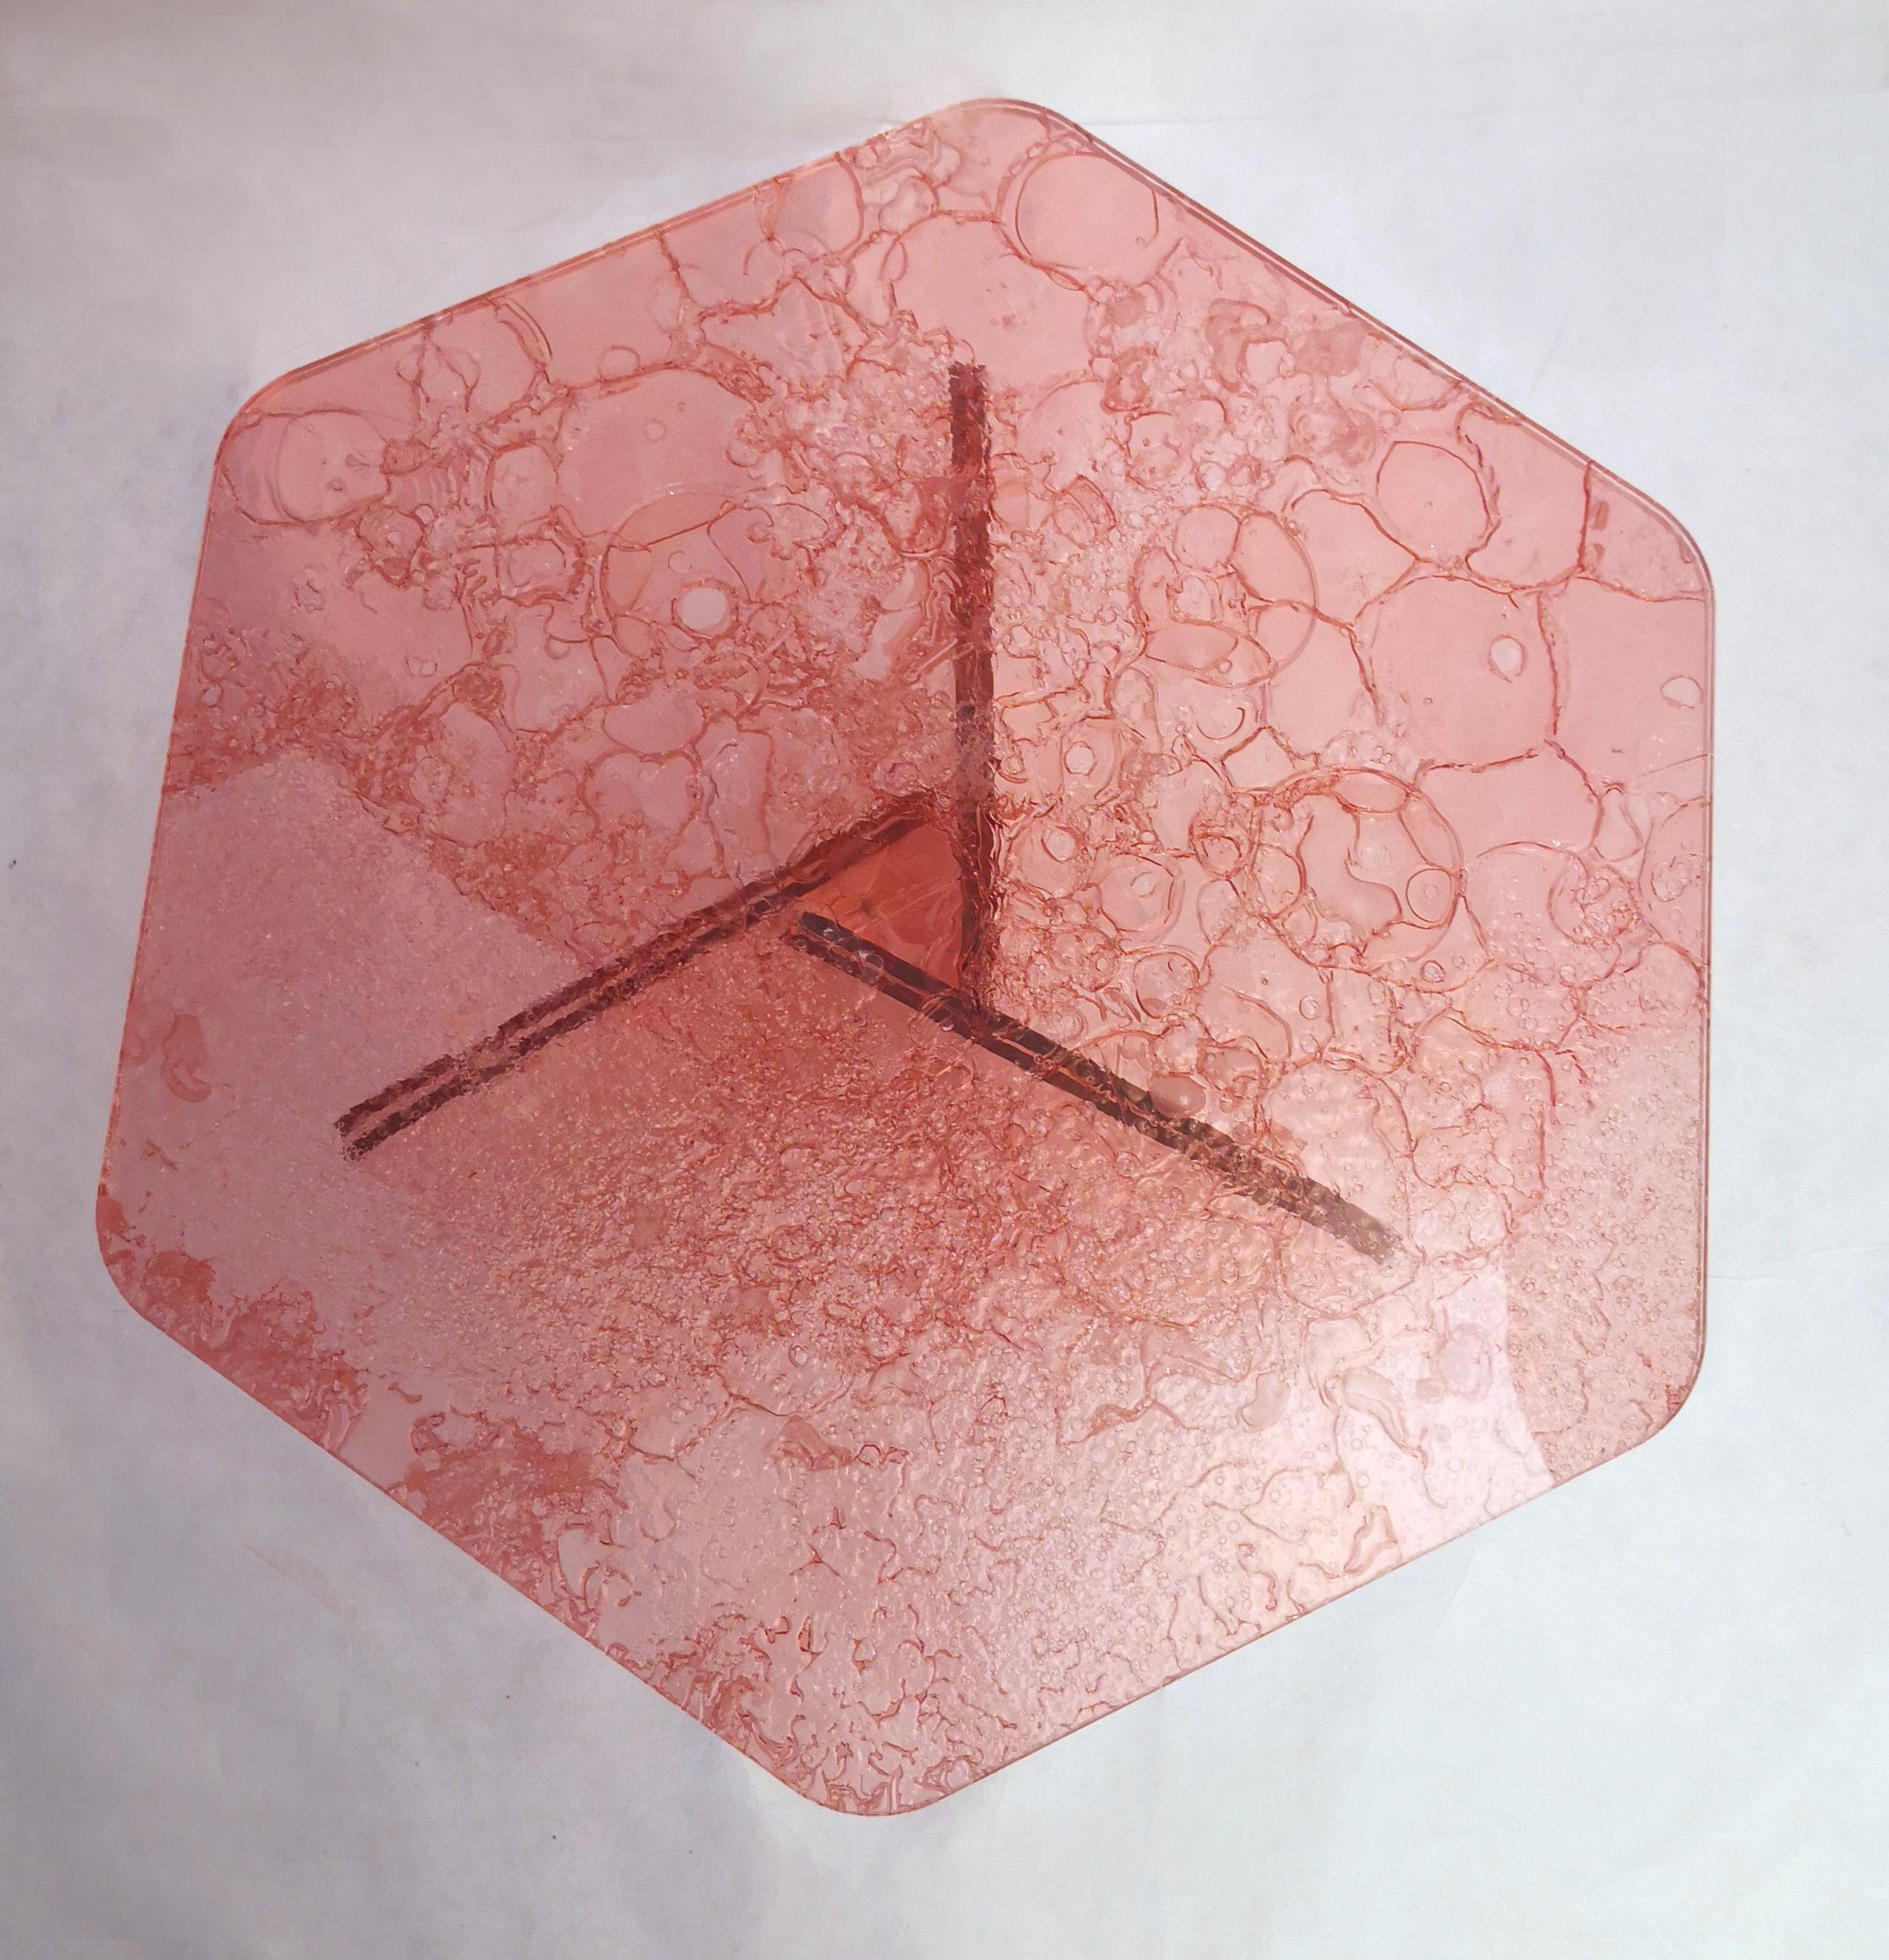 Italian Sketch Hexagon Sidetable Made of Pink Acrylic Des, Roberto Giacomucci in 2020 For Sale